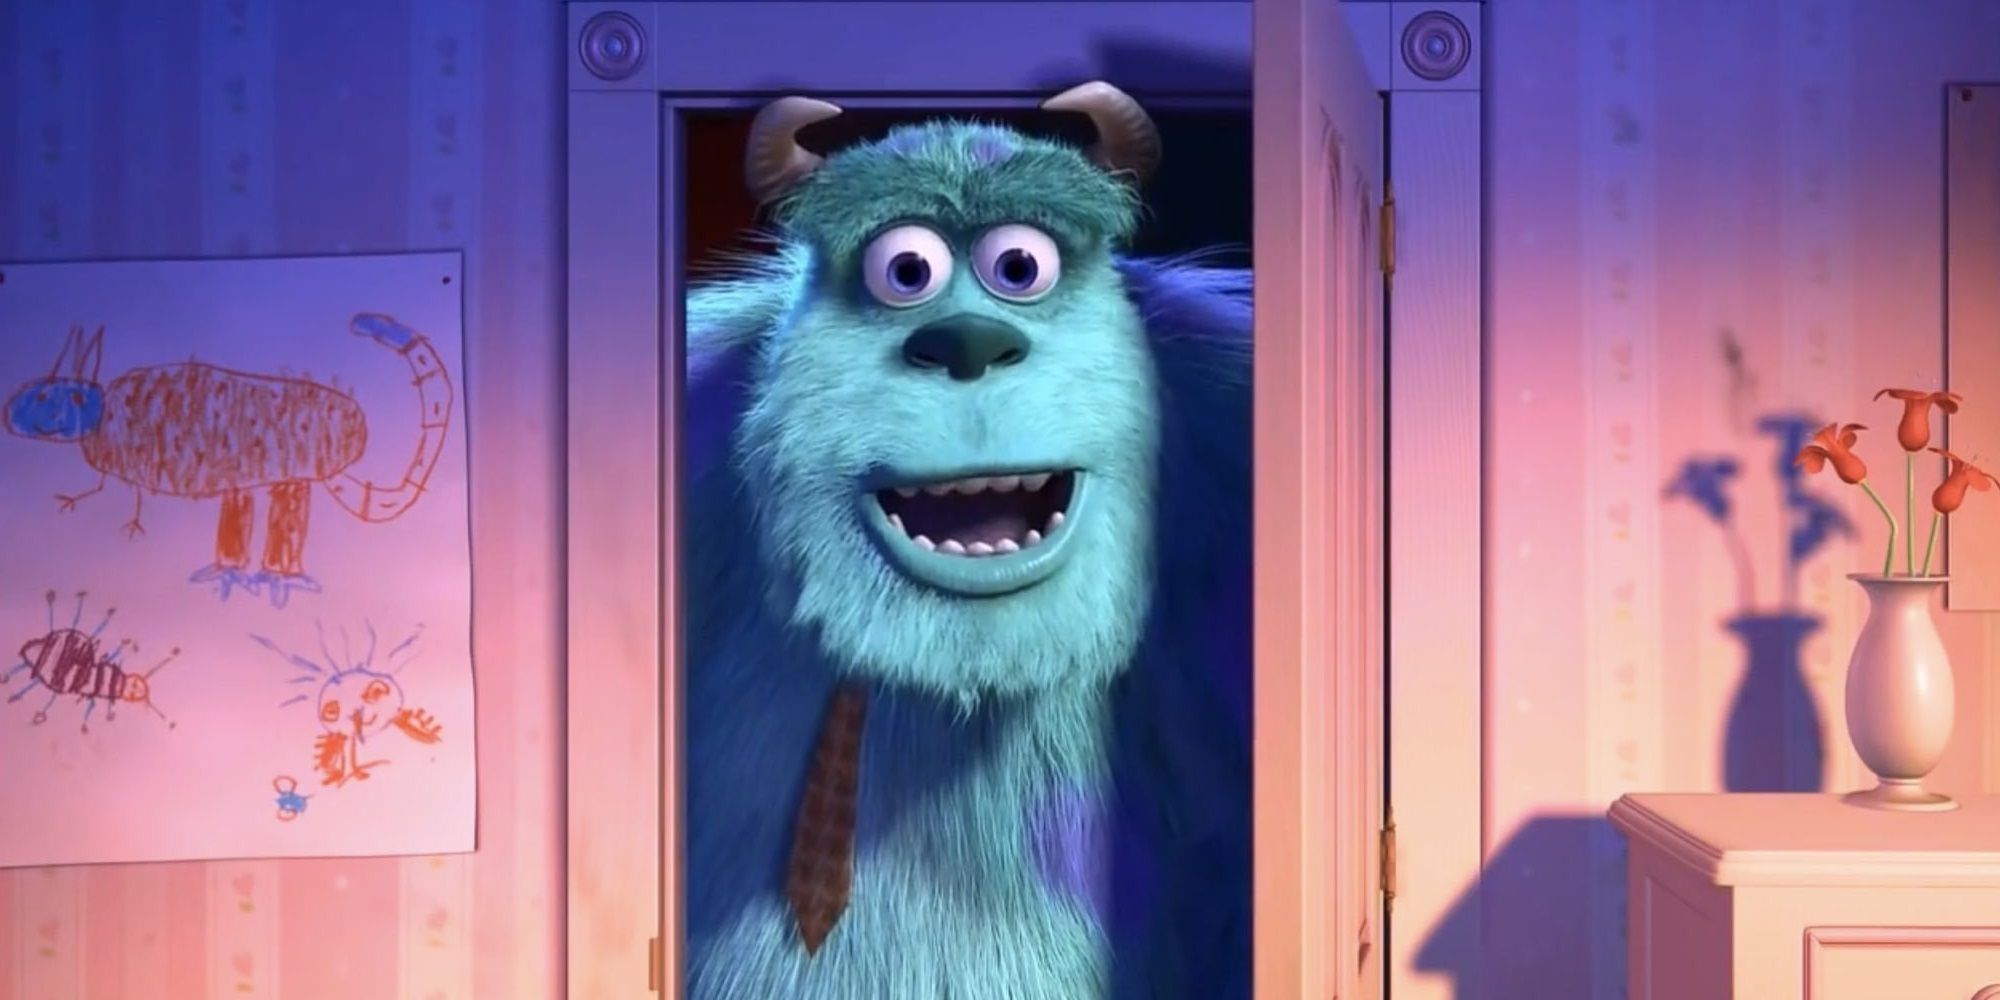 Sulley in Monsters Inc peaking from a closet